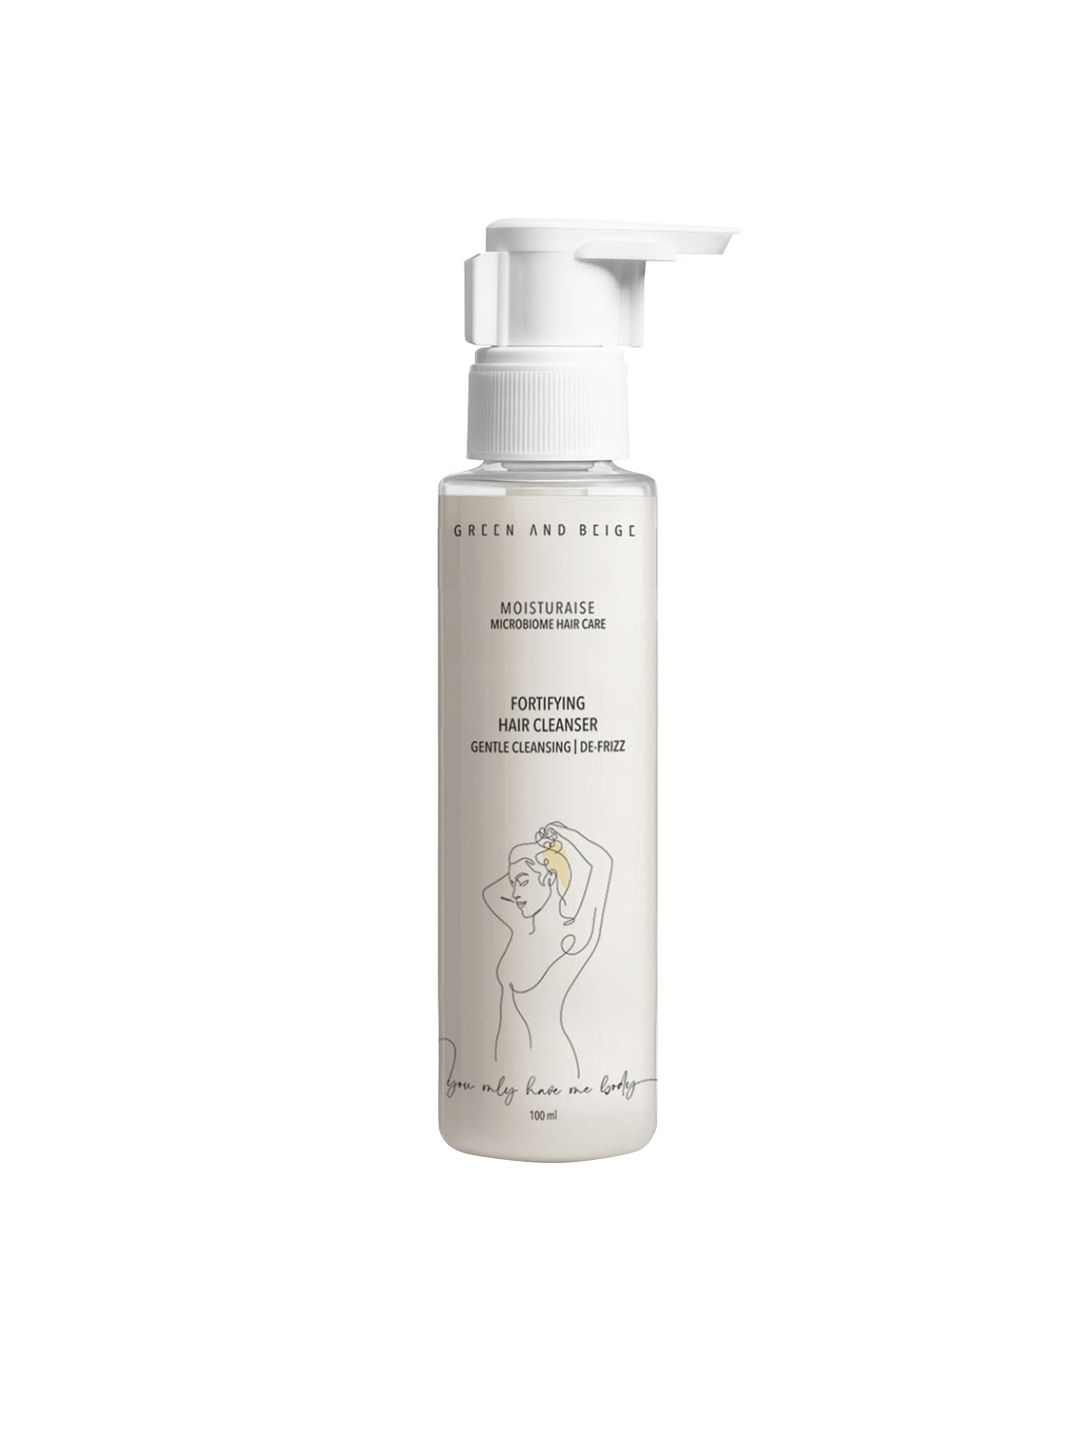 GREEN AND BEIGE Moisturaise Microbiome Hair Care Fortifying Hair Cleanser - 100 ml Price in India